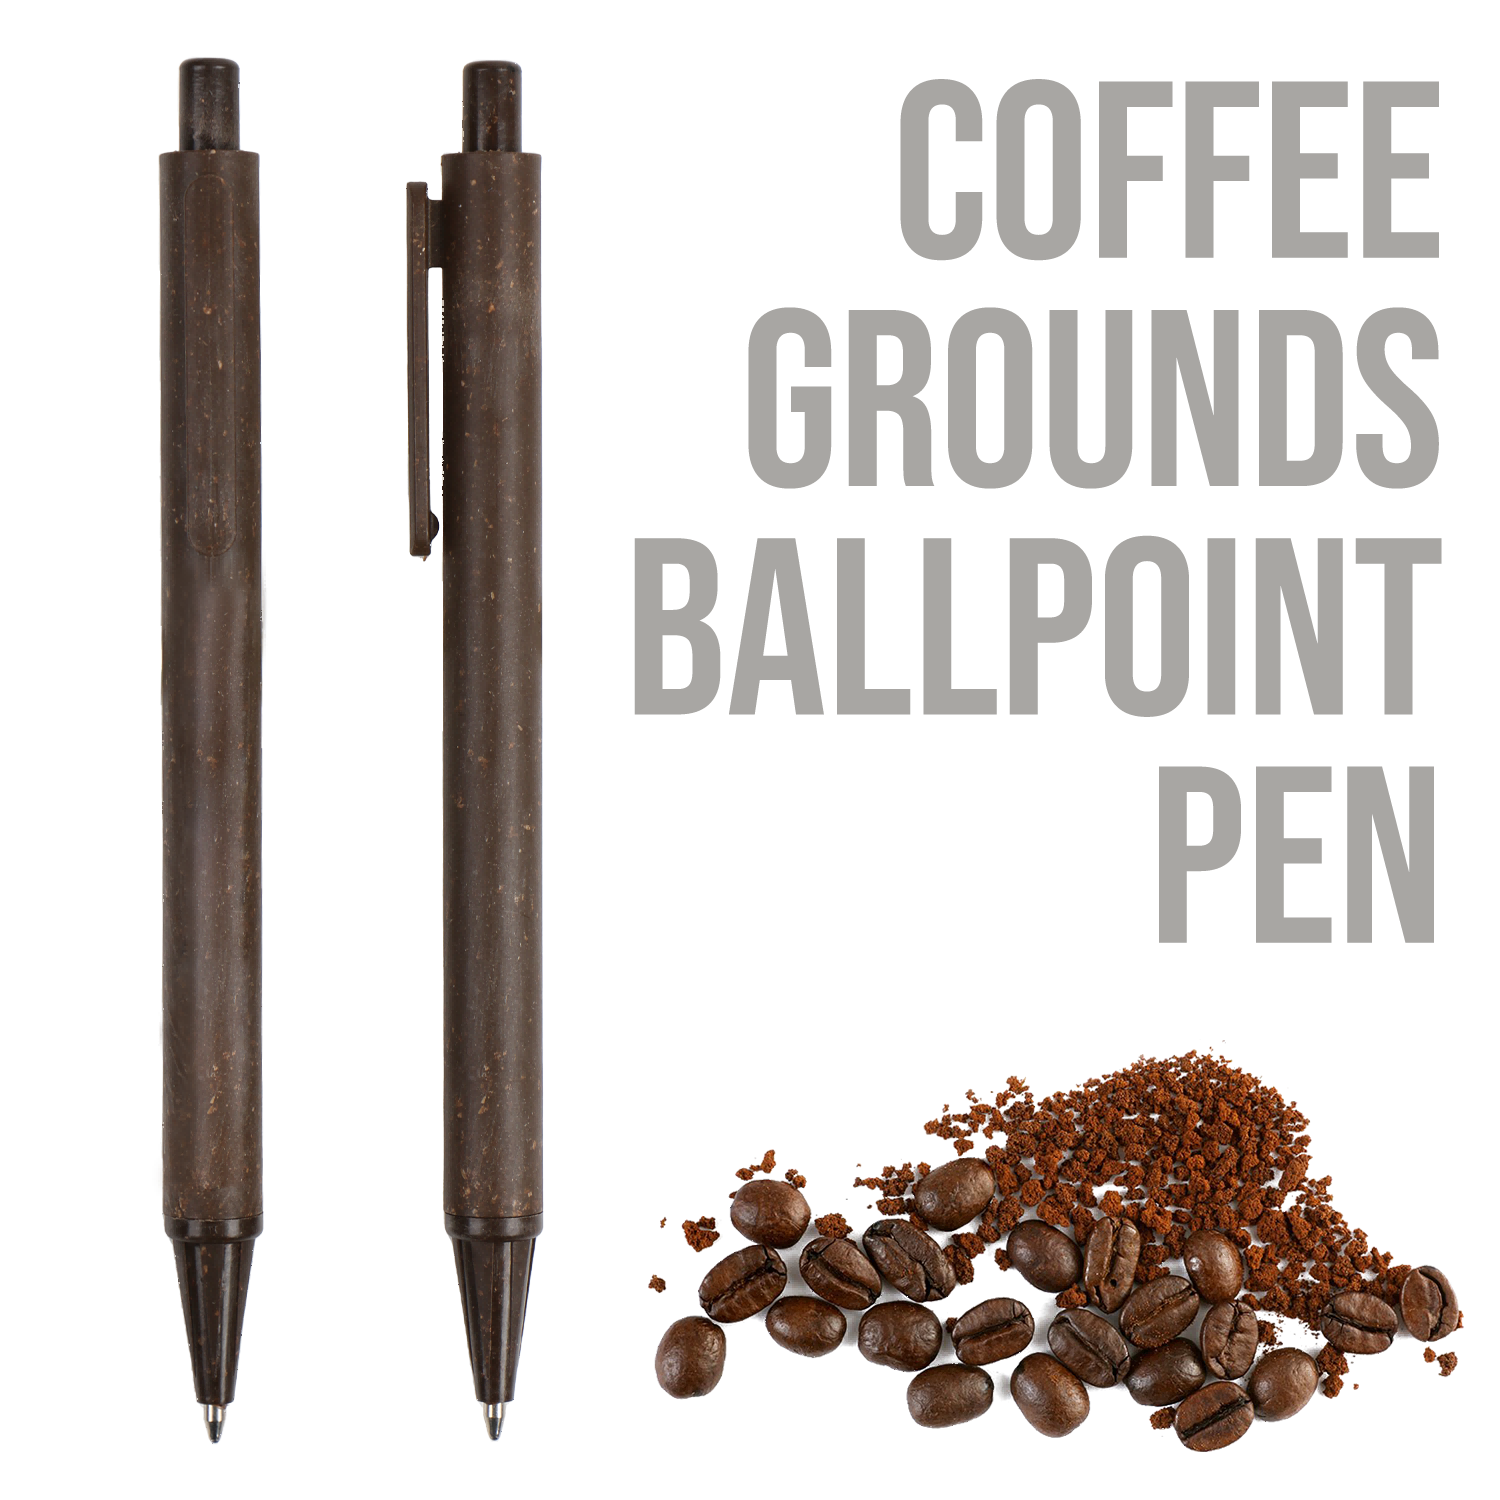 New coffee grounds promotional gift pens